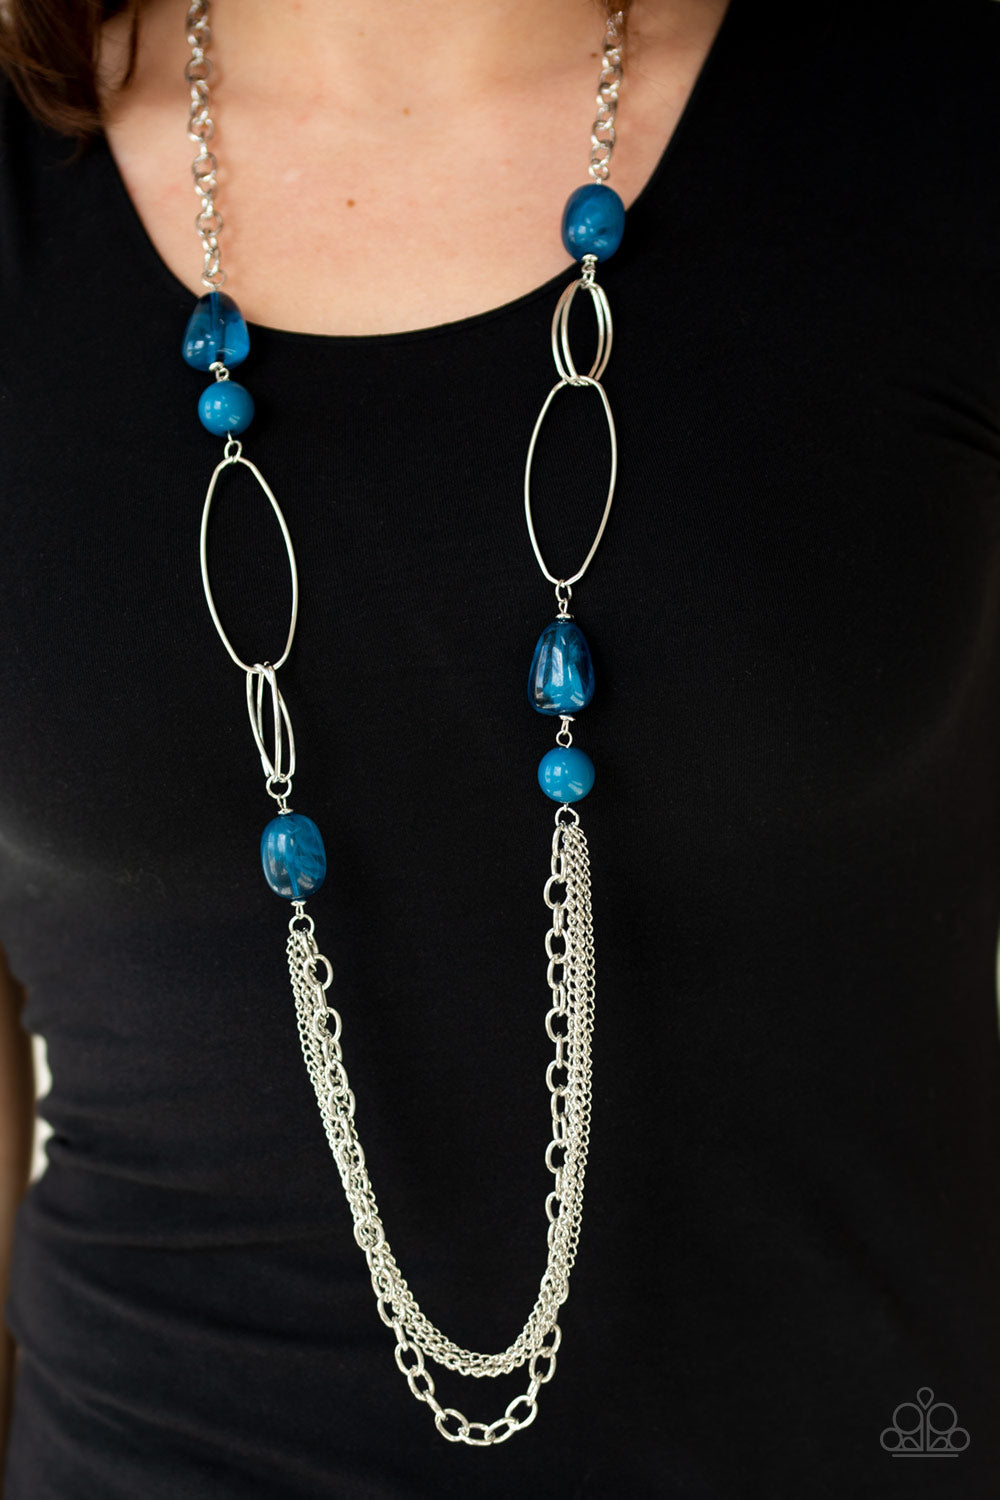 Pleasant Promenade - Blue and Silver Necklace - Paparazzi Accessories - Polished and cloudy faux rock finishes, blue beads link with bold silver hoops. The whimsical compilation gives way to layers of mismatched silver chains for a seasonal finish. Features an adjustable clasp closure necklace.